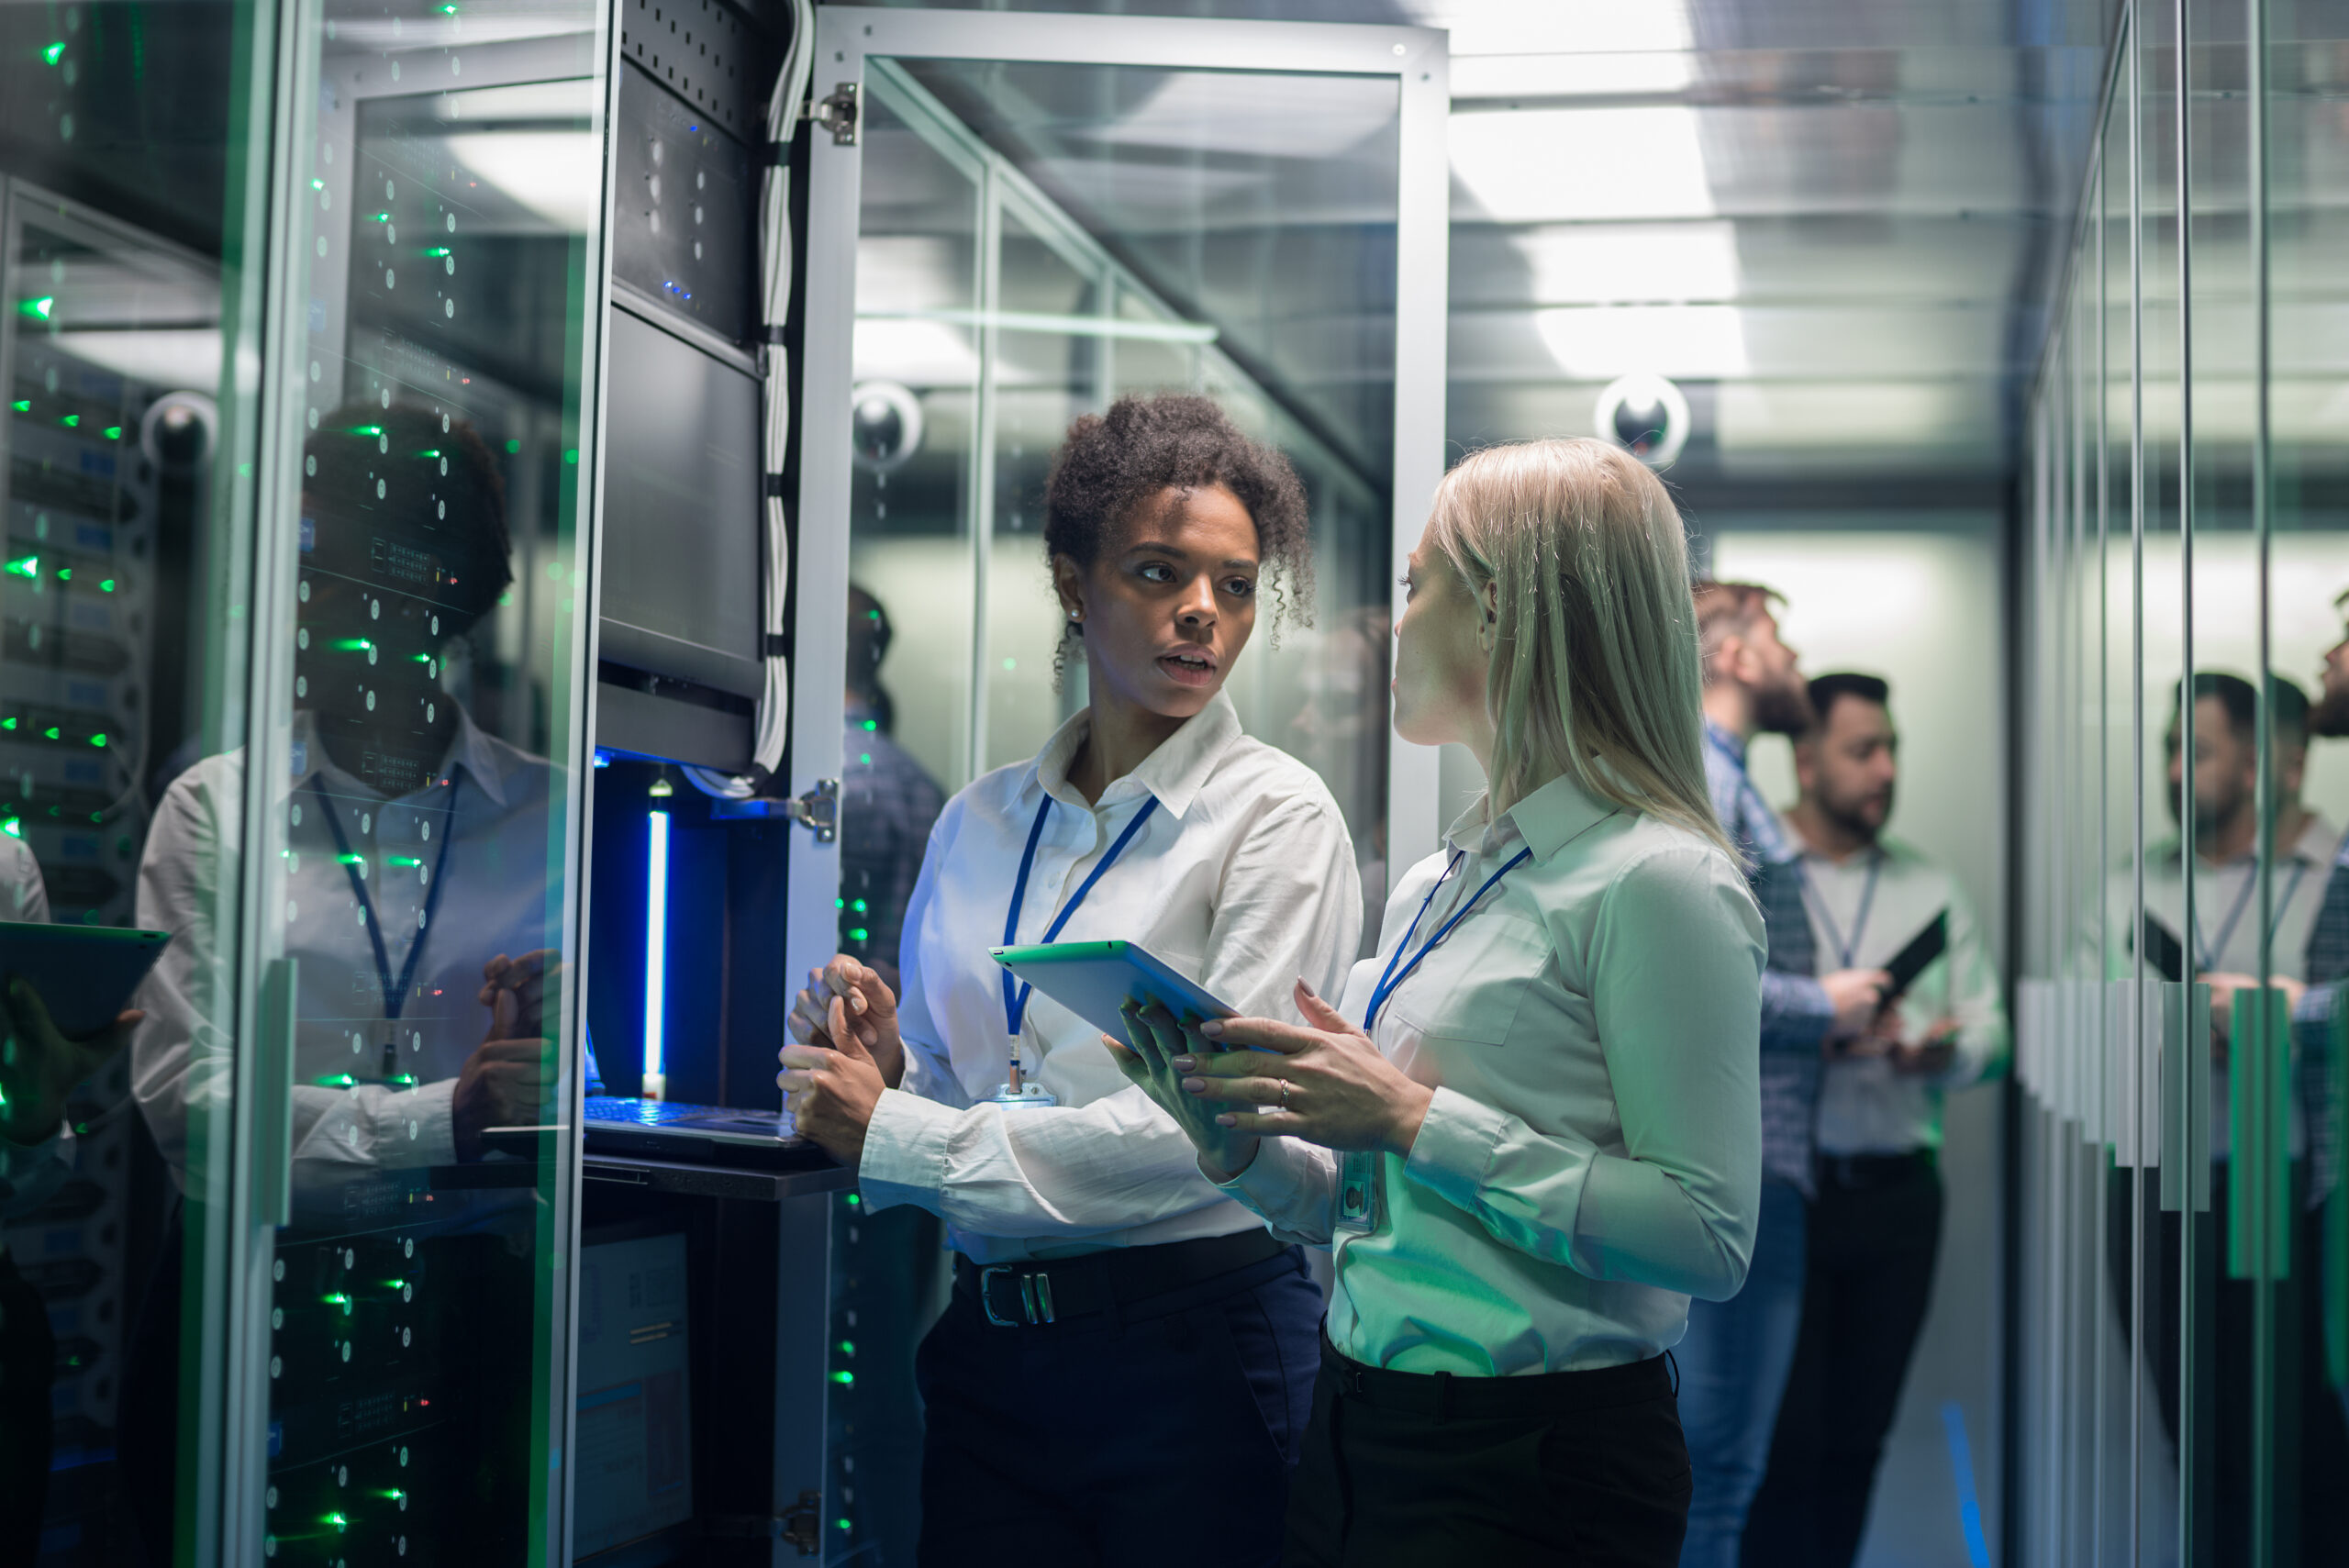 Cybersecurity Awareness Month: Medium shot of two women working in a data center with rows of server racks and checking the equipment and discussing their work